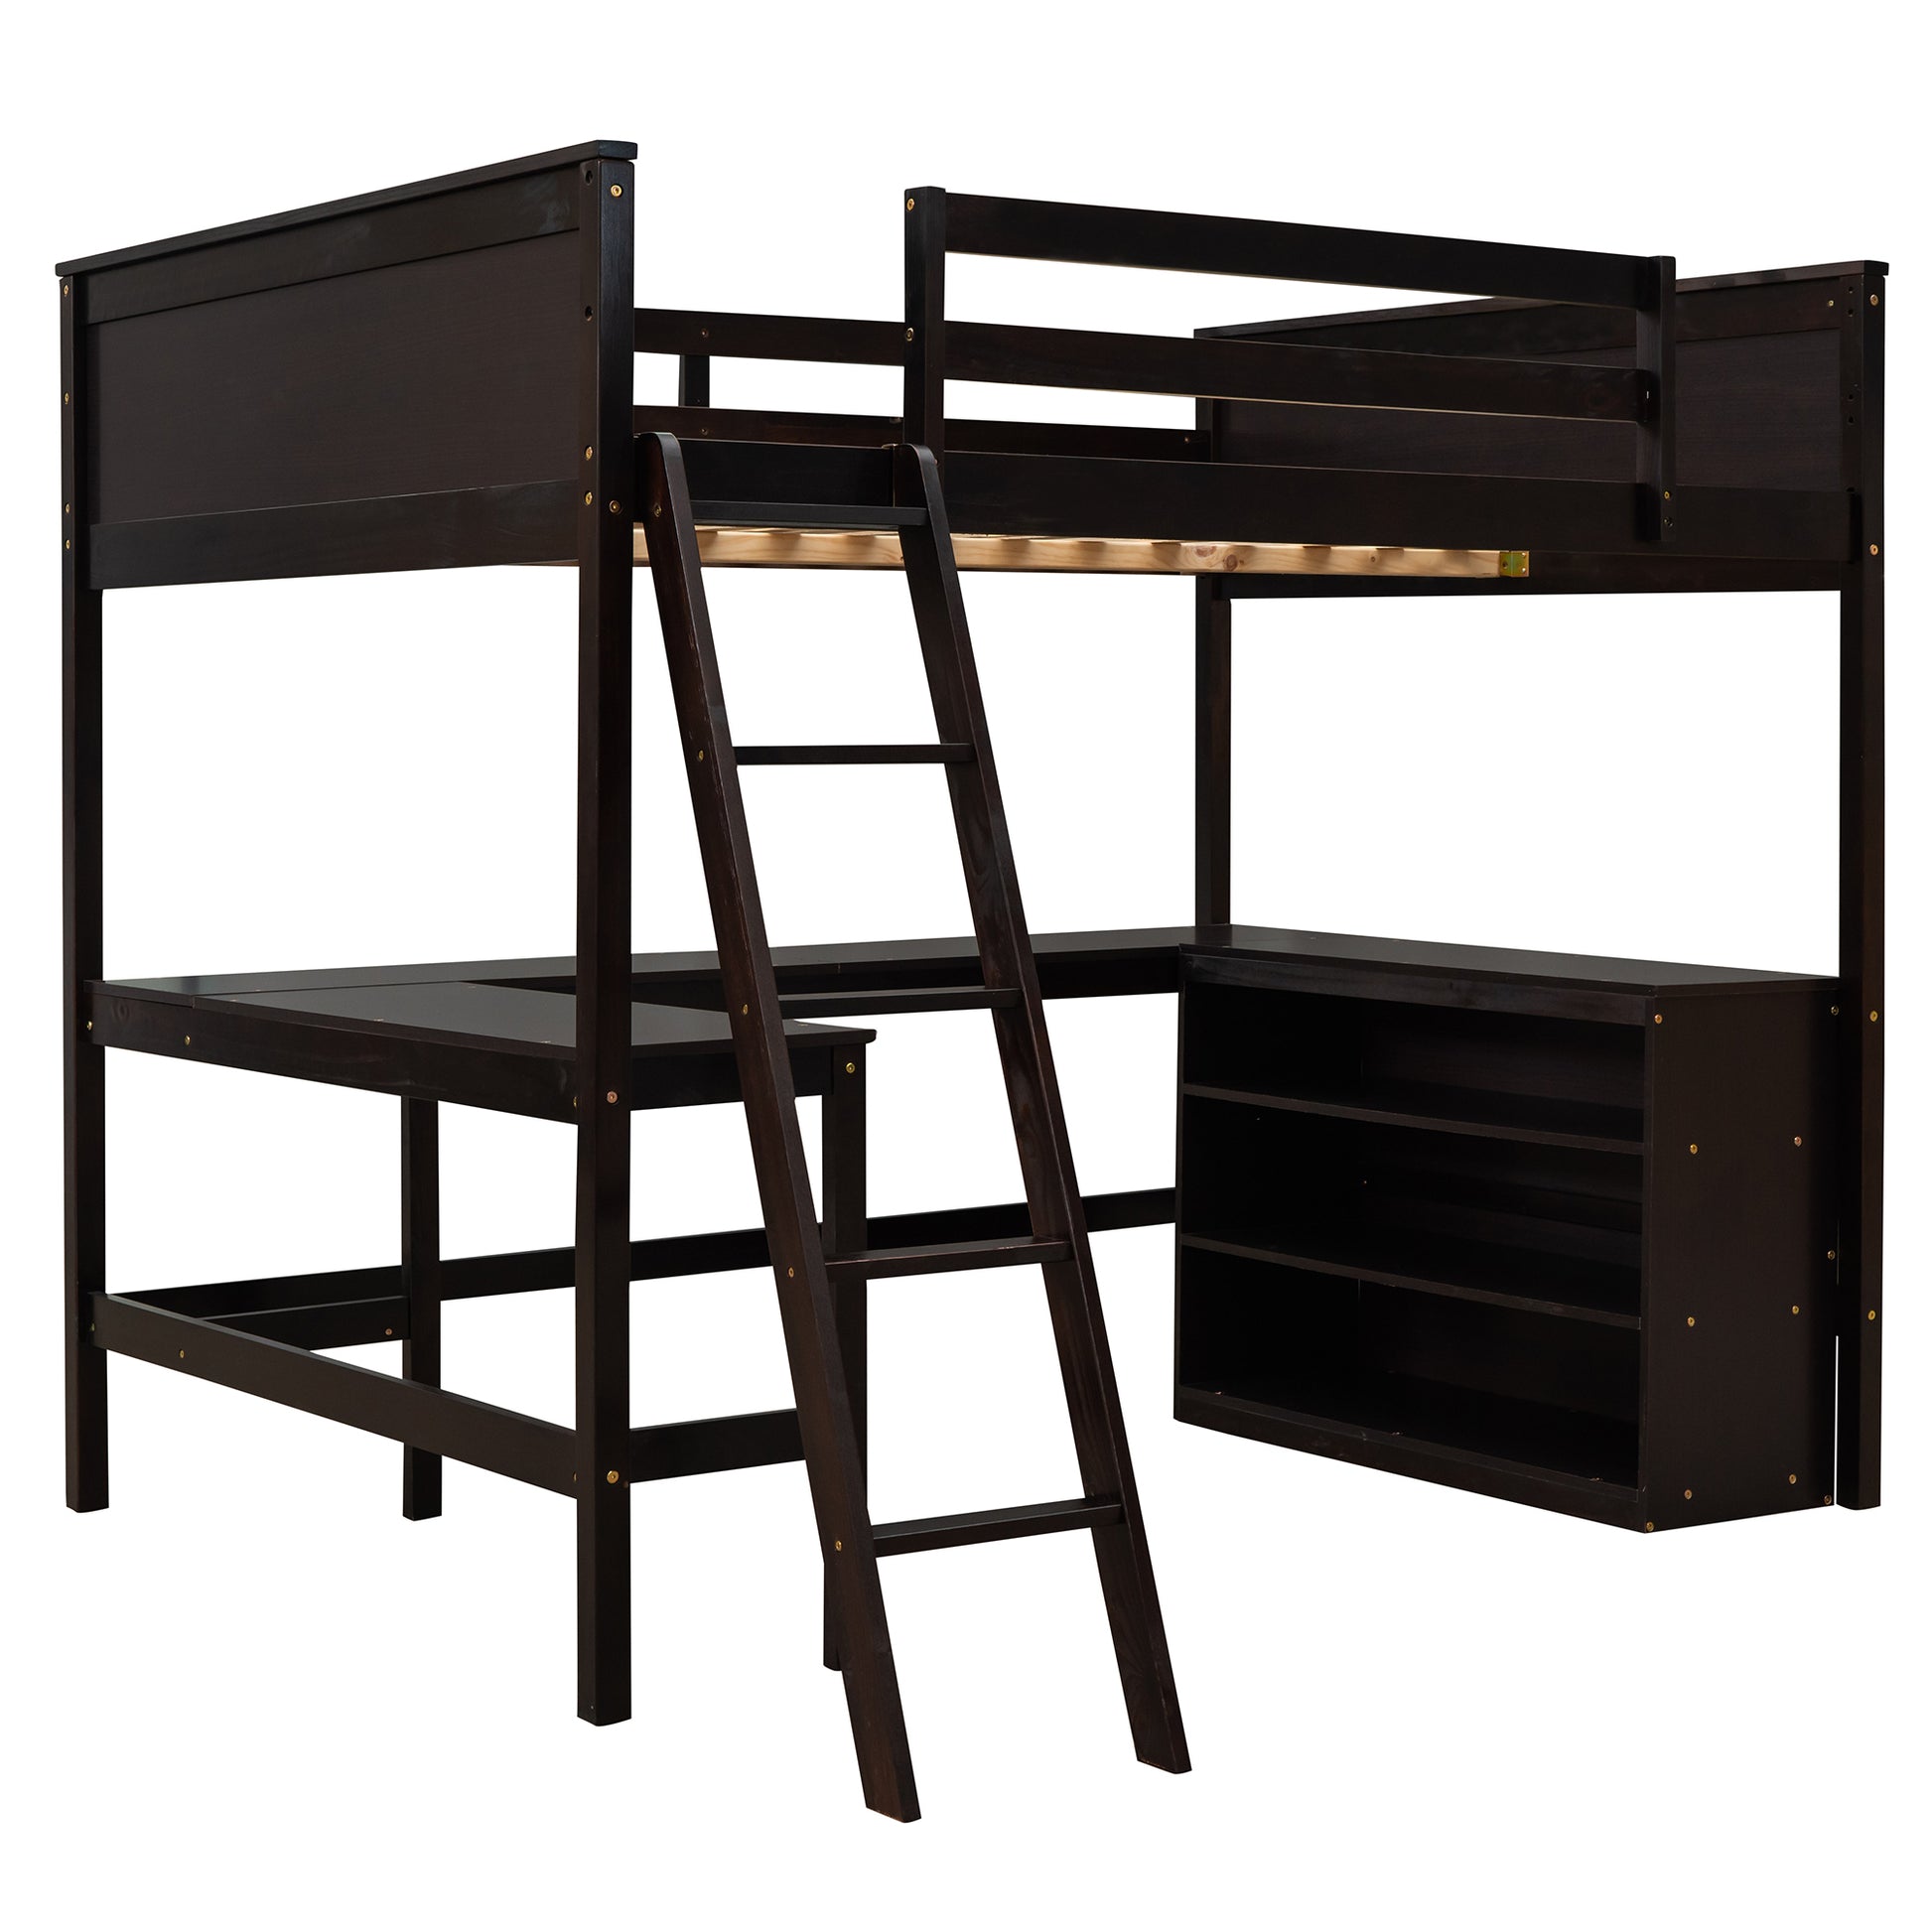 Full size Loft Bed with Shelves and Desk, Wooden Loft espresso-solid wood